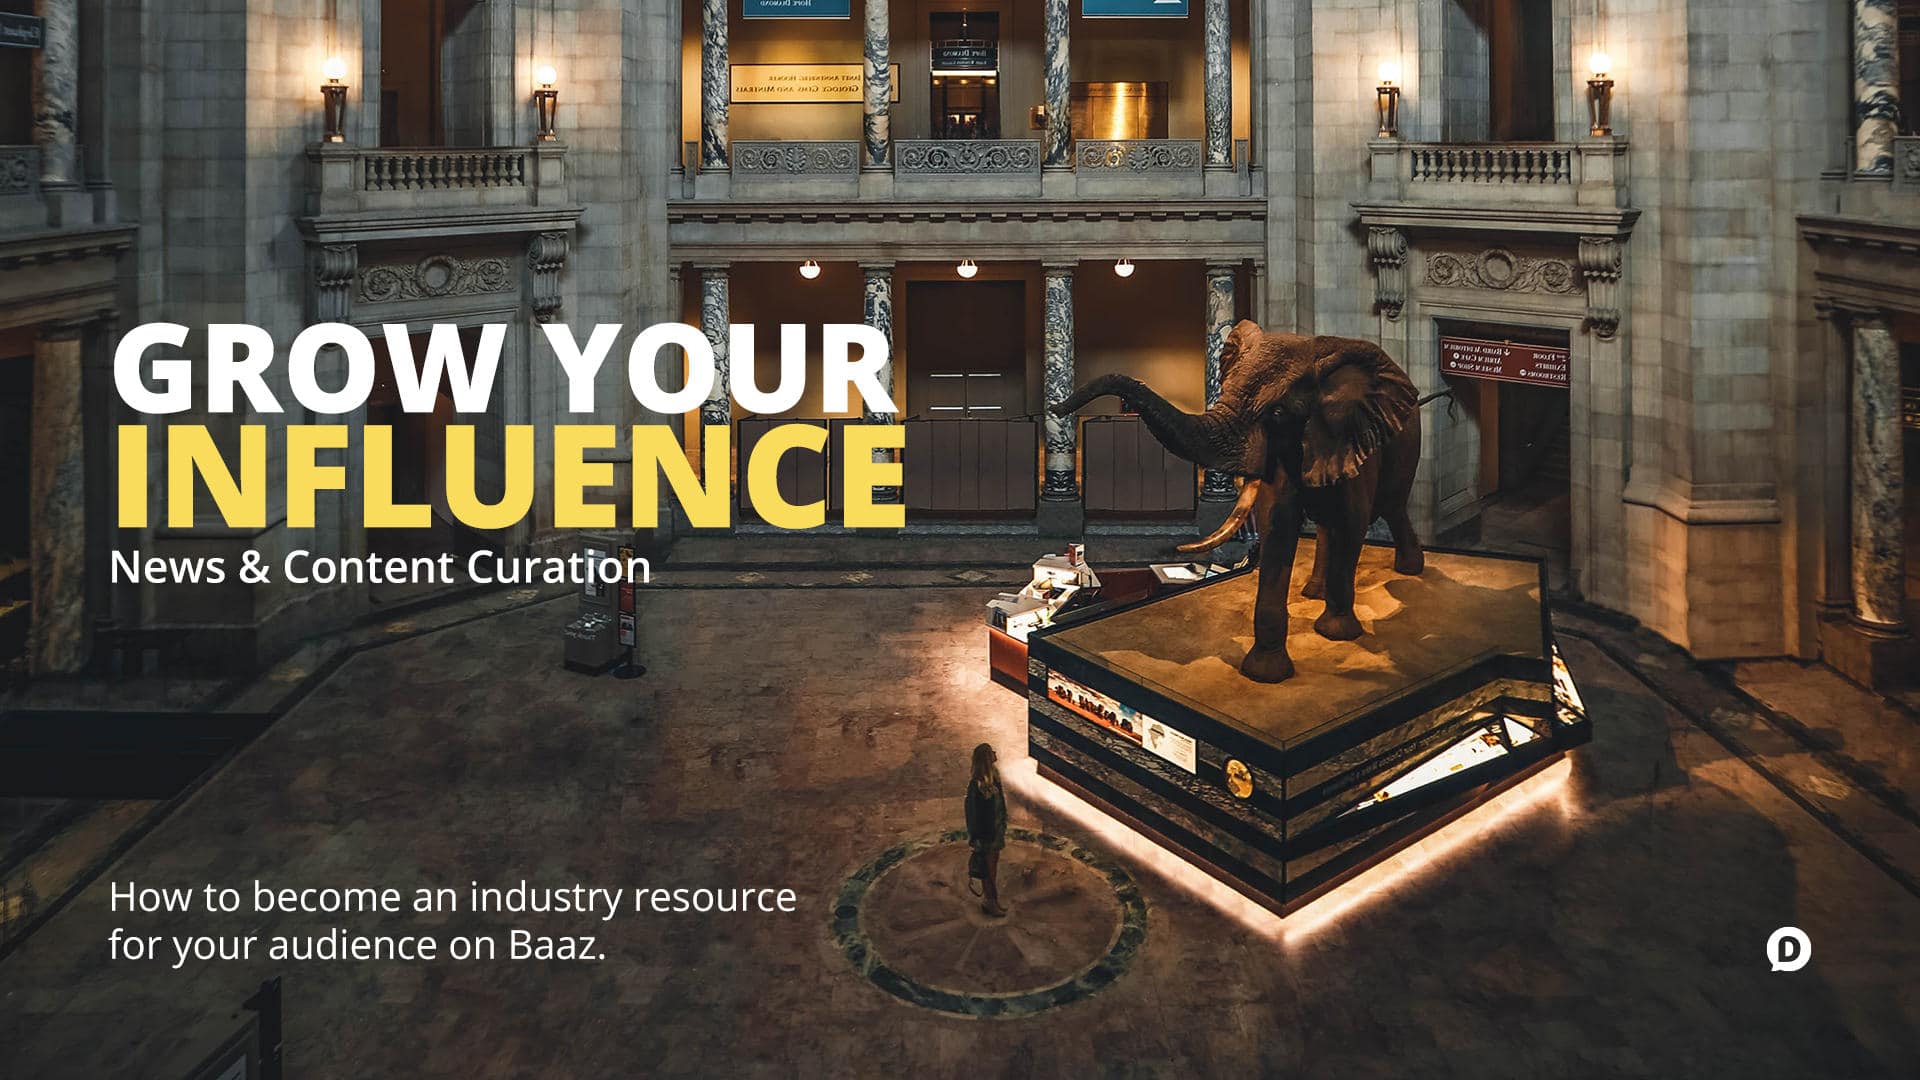 Grow Your Influence on Baaz with News and Content Curation